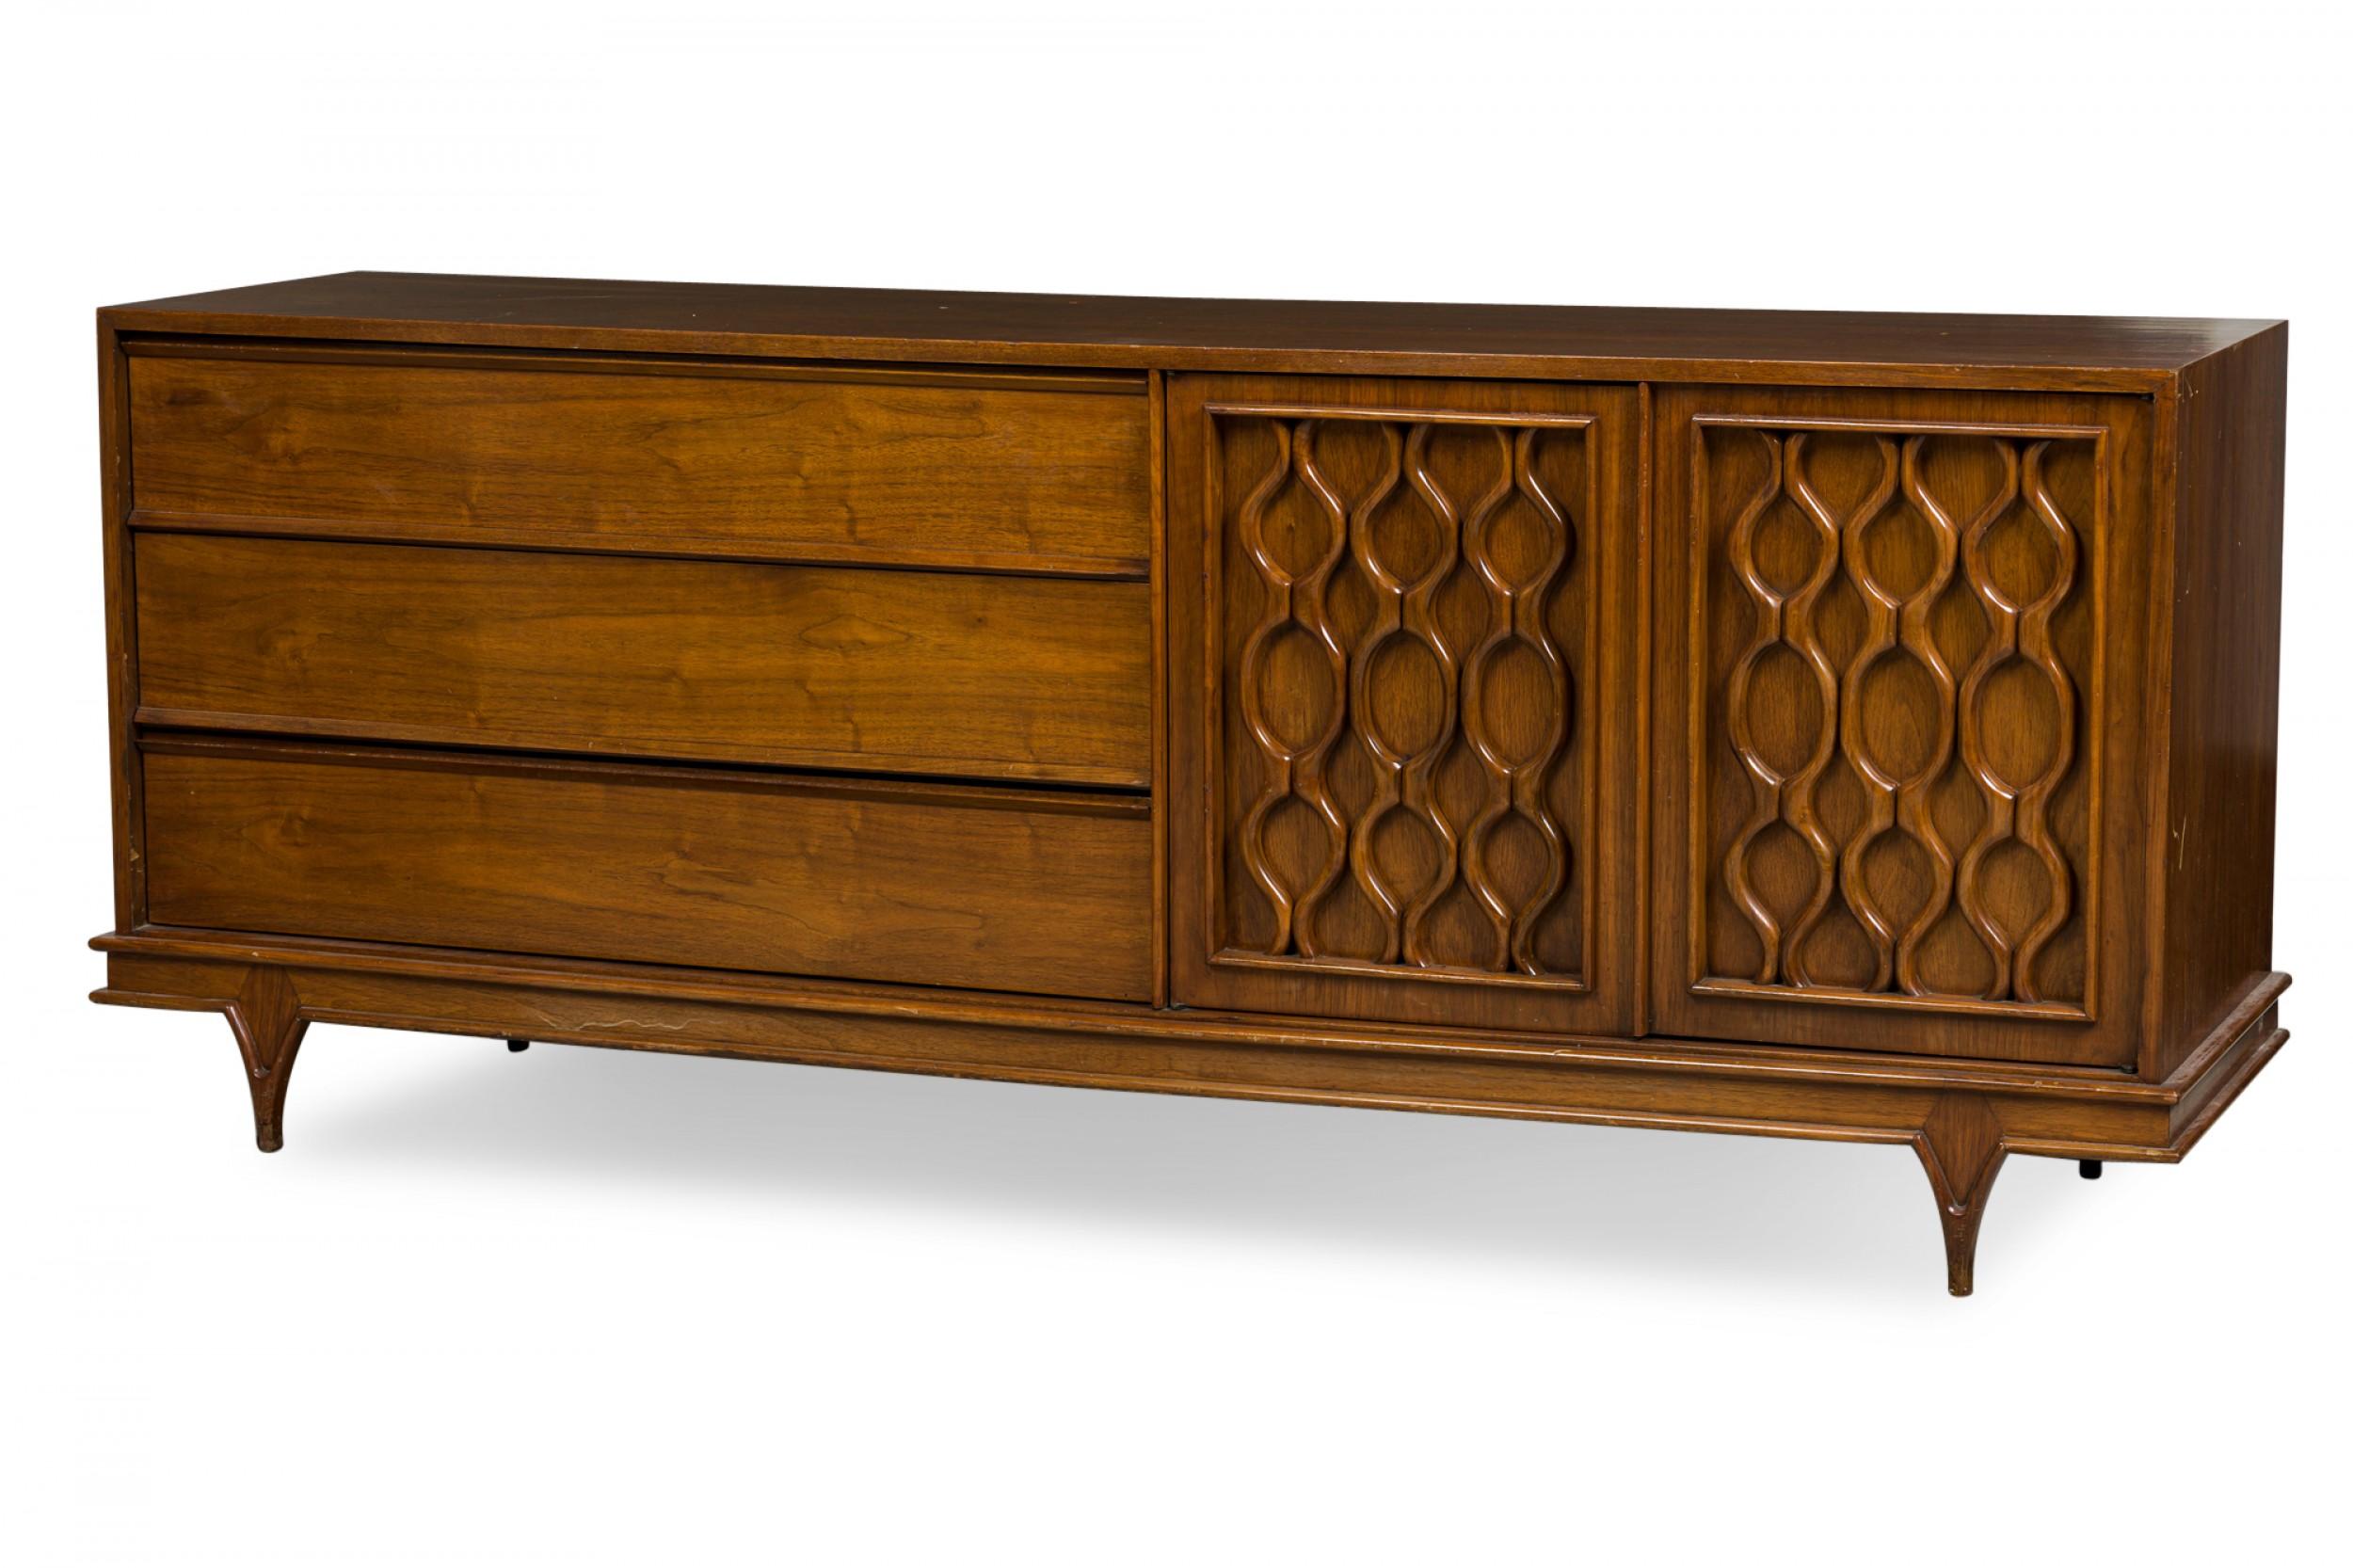 American Mid-Century walnut credenza / sideboard with three drawers on the left side, and two cabinet doors on the right with decoratively carved geometric fronts, resting on four short tapered walnut legs. (STANLEY FURNITURE).